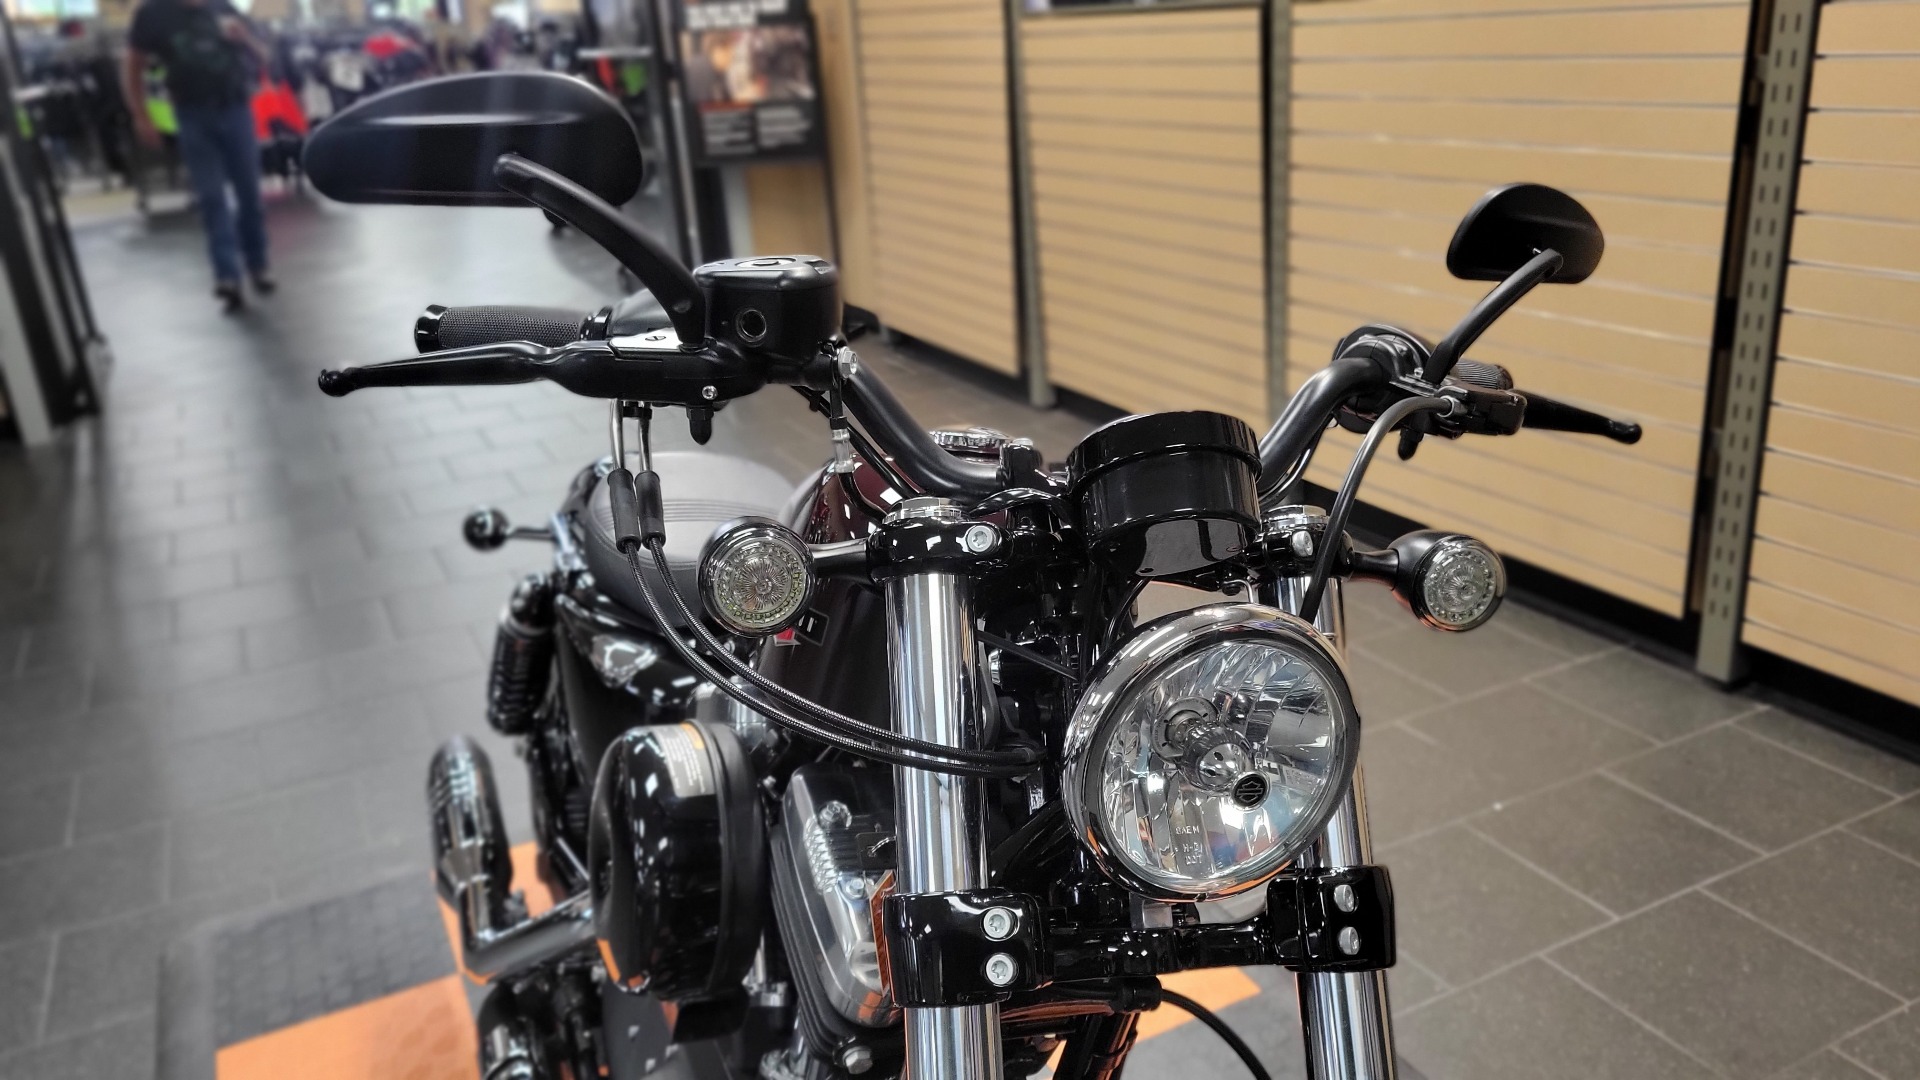 2021 Harley-Davidson Forty-Eight® in The Woodlands, Texas - Photo 10